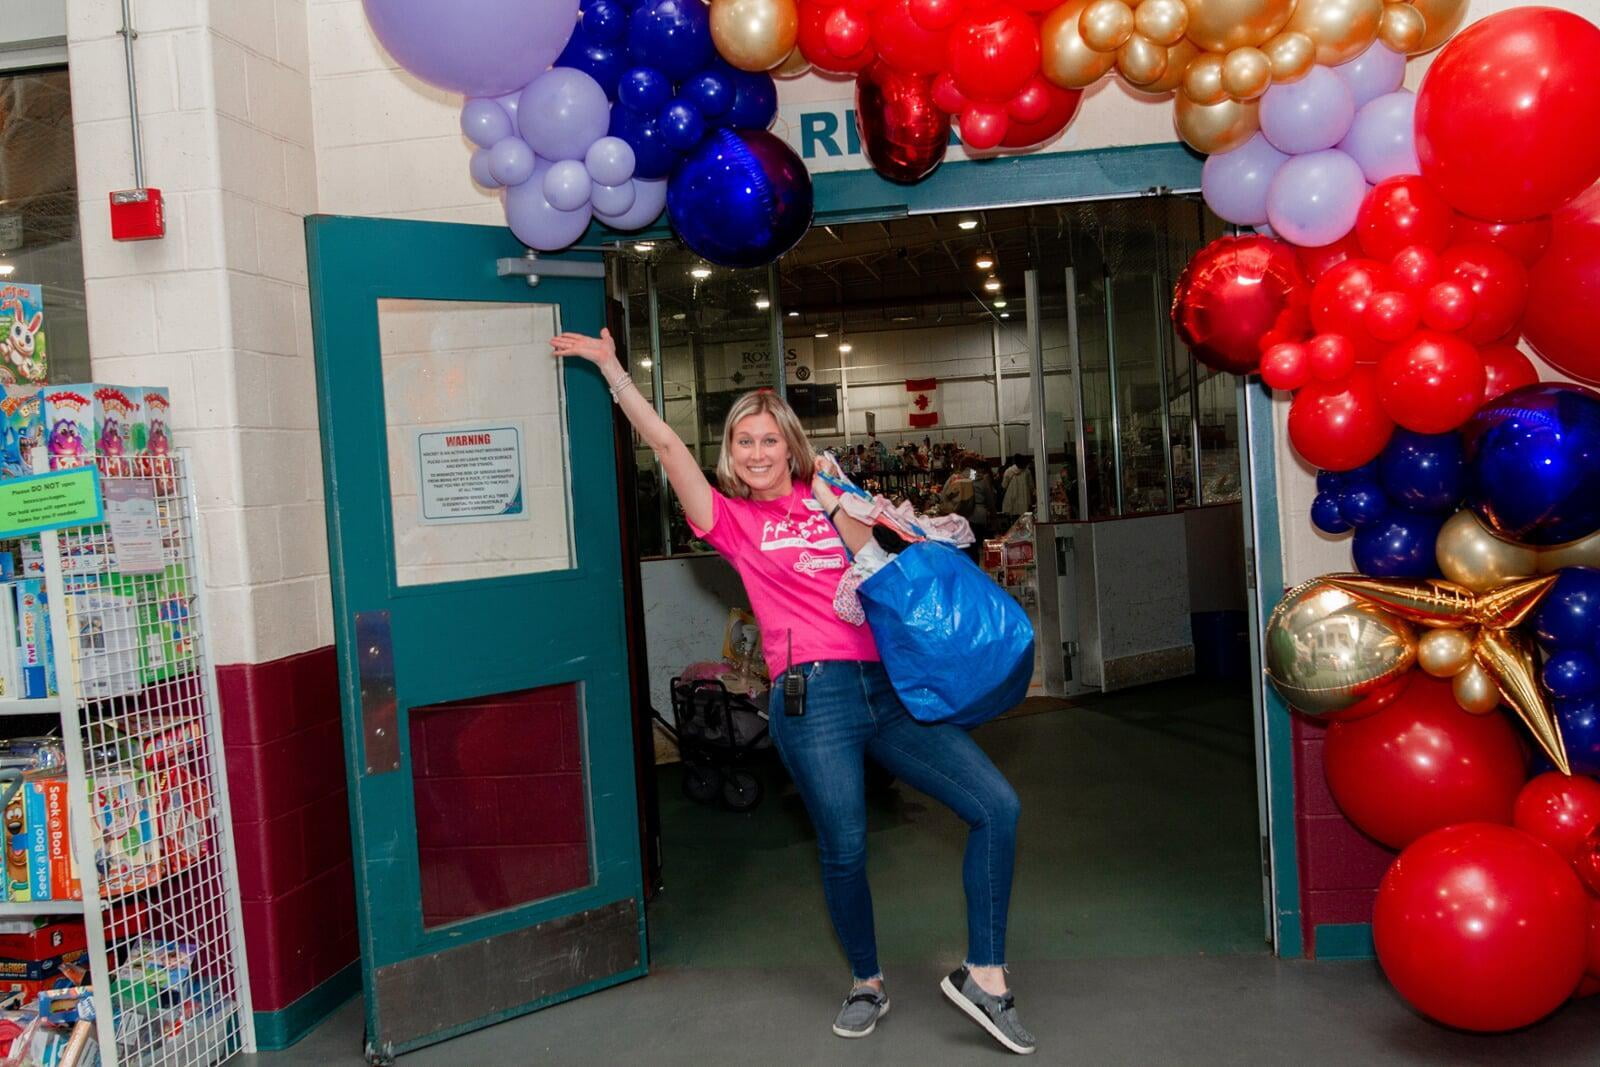 Woman waving inside of a doorway. The doorway is surrounded in purple, blue, gold and red balloons.